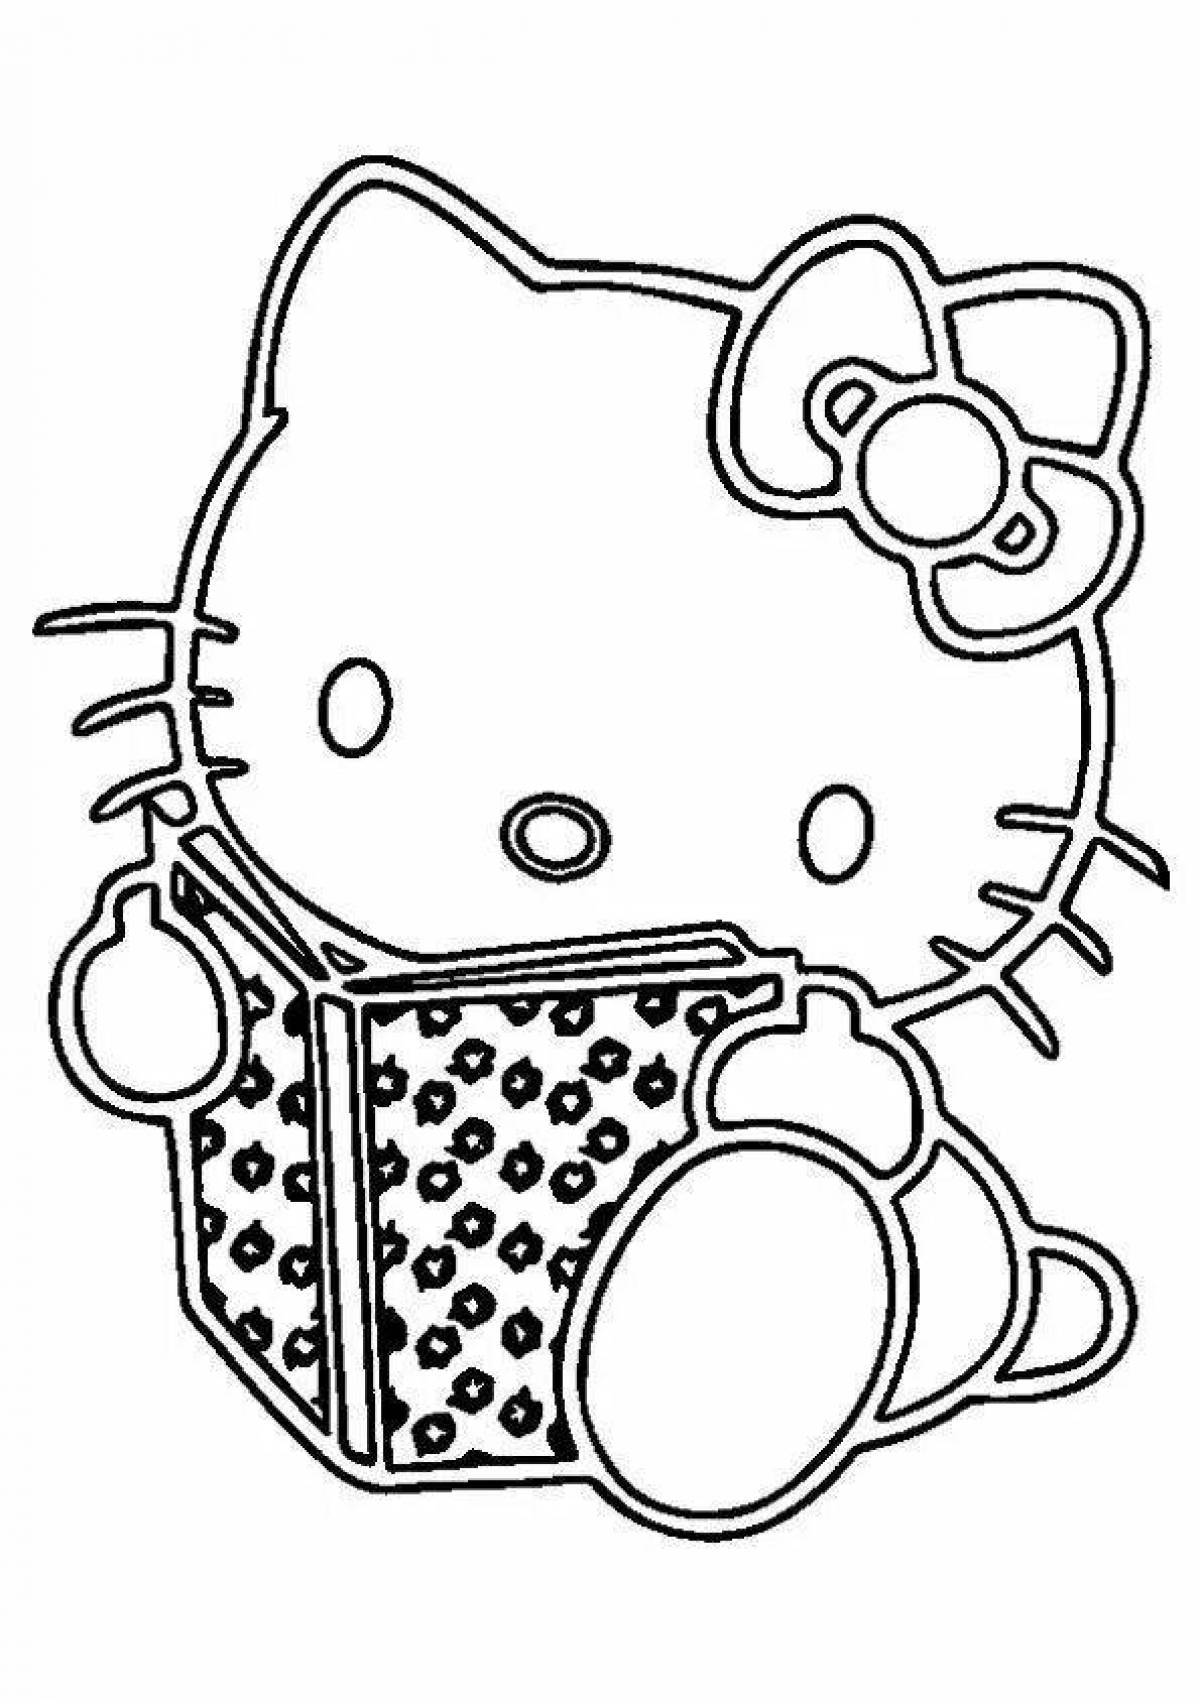 Blissful hello kitty head coloring page